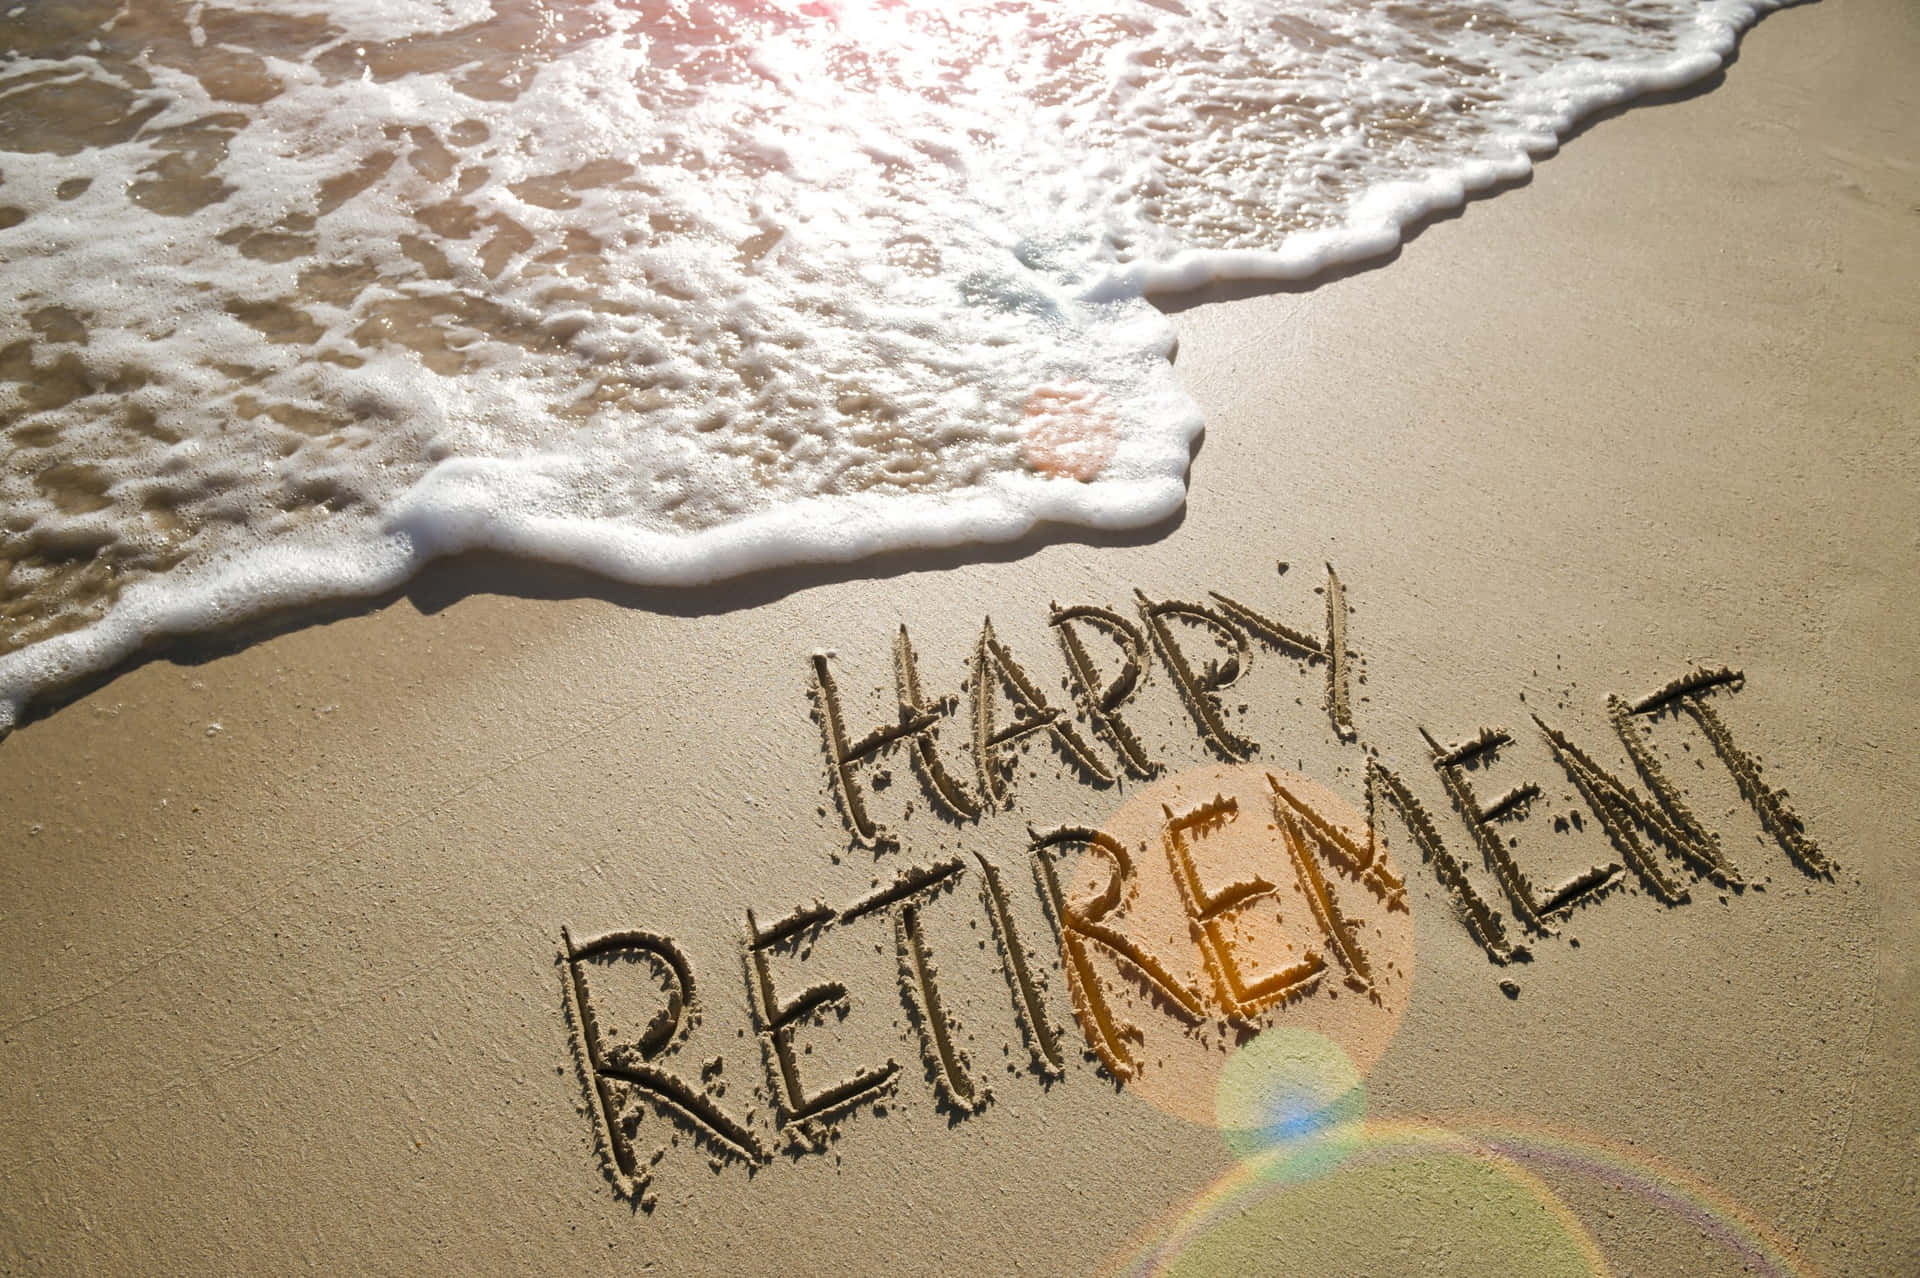 “Celebrate Retirement: Time to Enjoy the Benefits of a Lifetime of Hard Work”